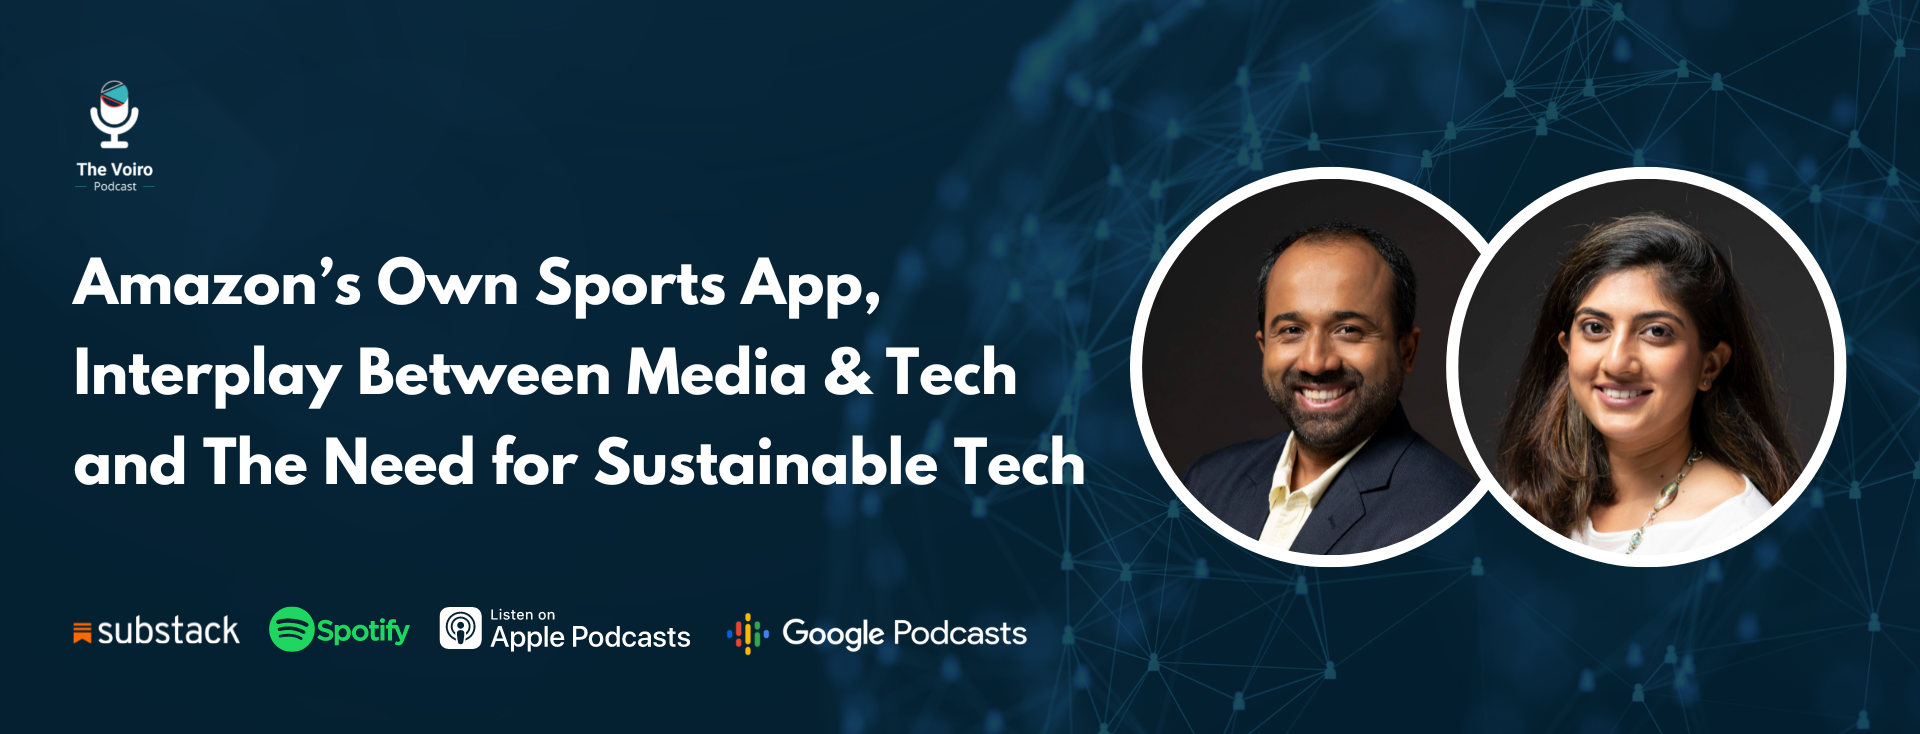 https://voiro.com/podcast/amazons-own-sports-app-media-and-tech-and-sustainable-tech